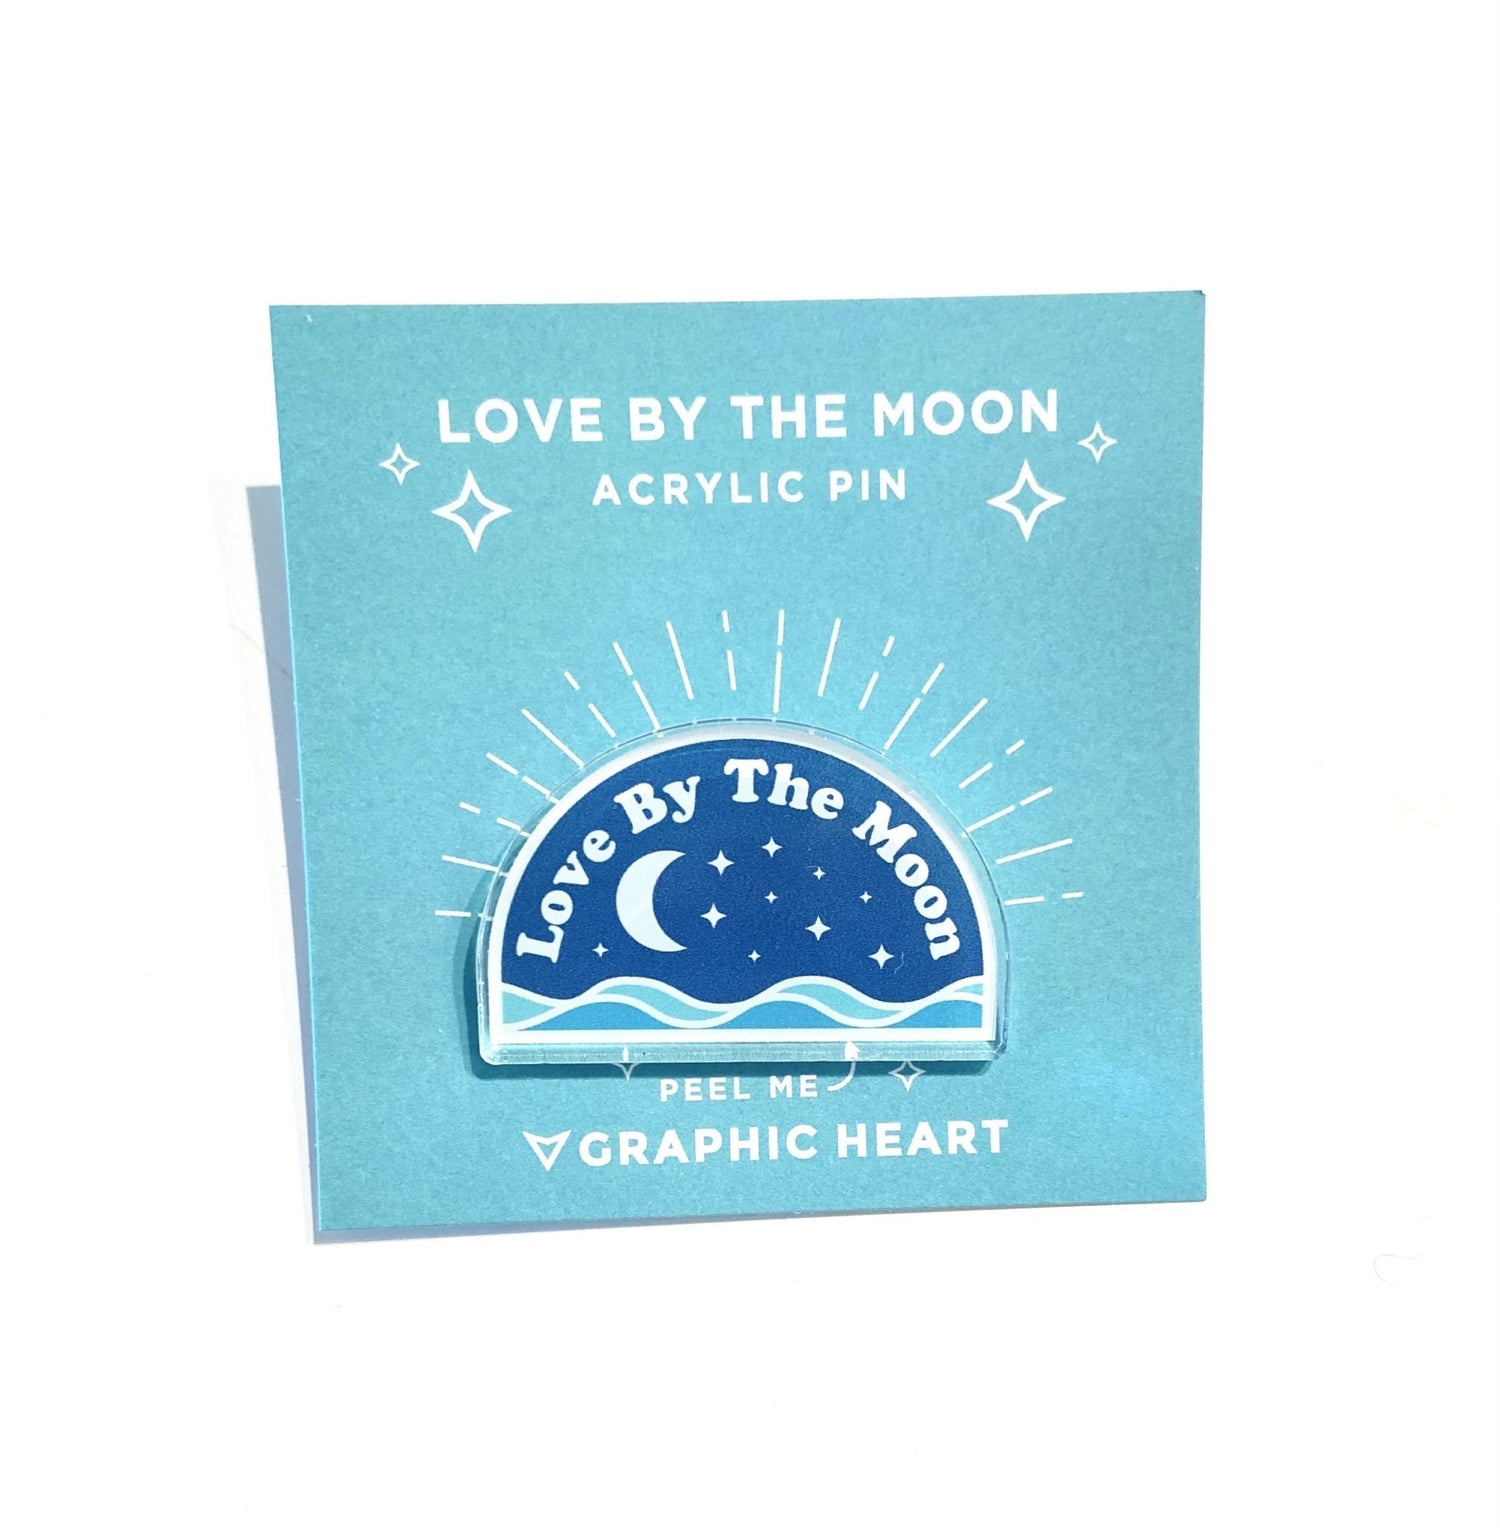 Love By The Moon Acrylic Pin - Shop Graphic Heart